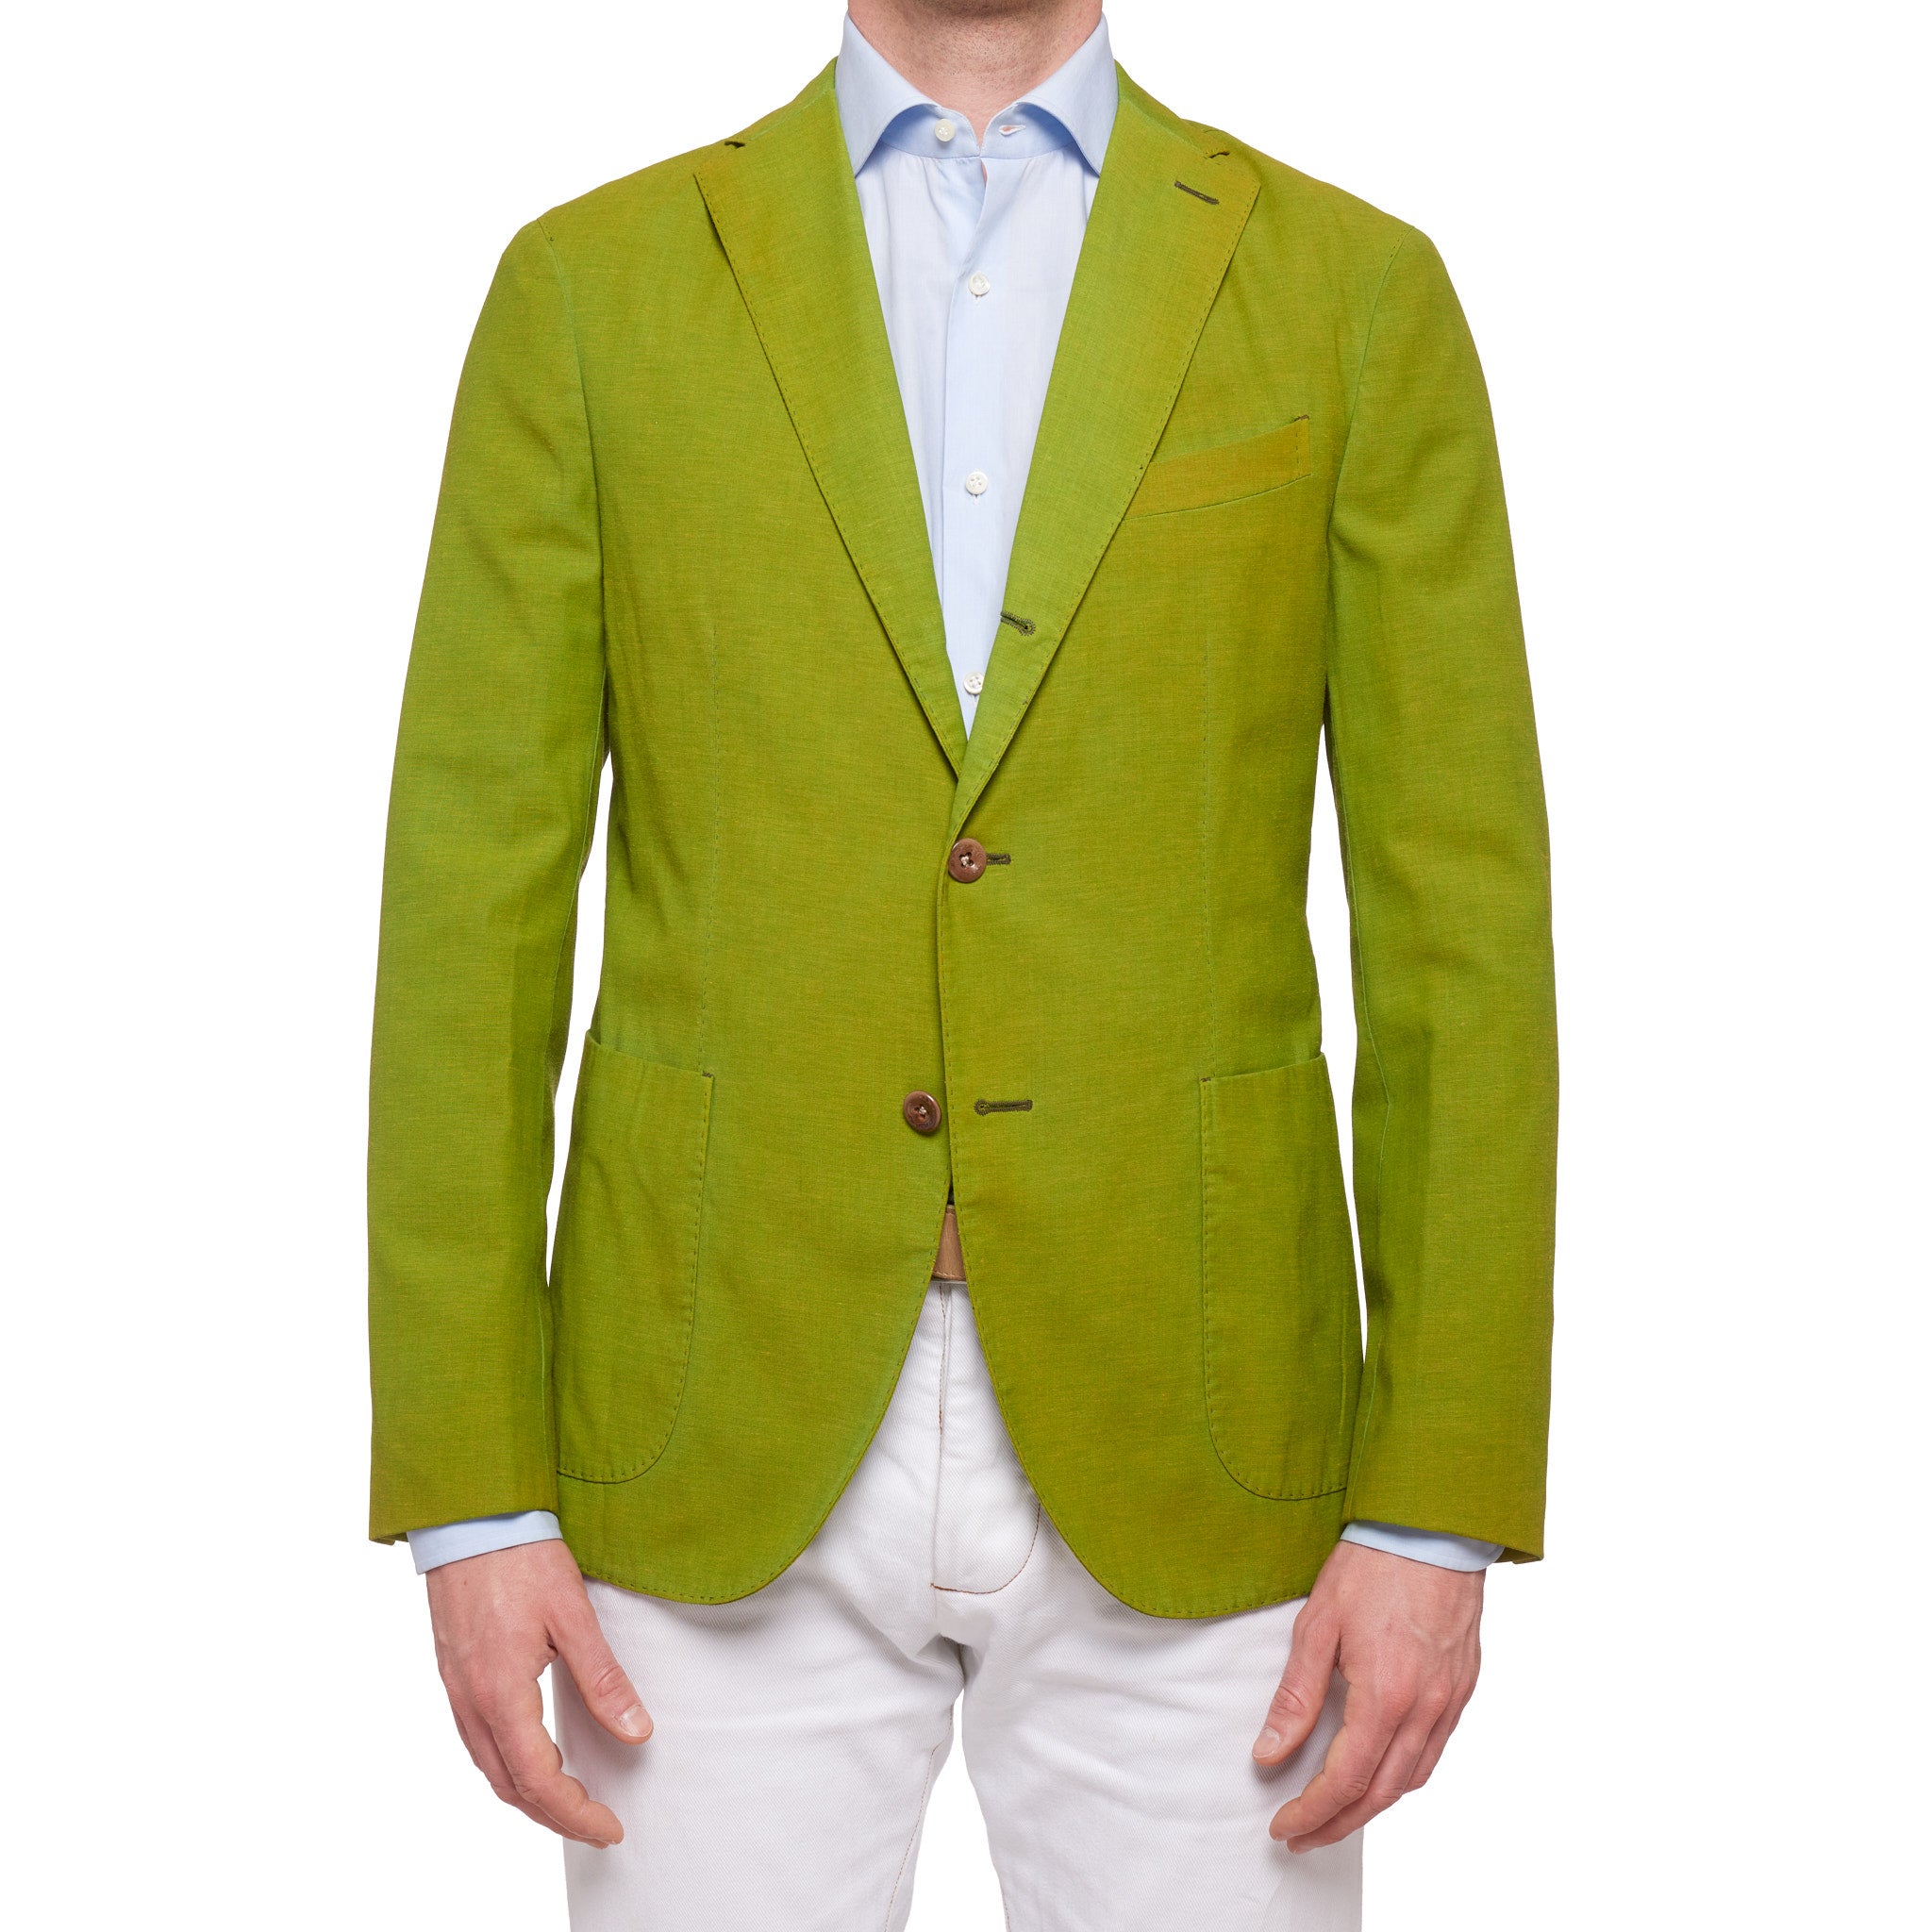 BOGLIOLI Galleria Lime Garment Dyed Wool-Cotton-Mohair Unlined Jacket 50 NEW 40